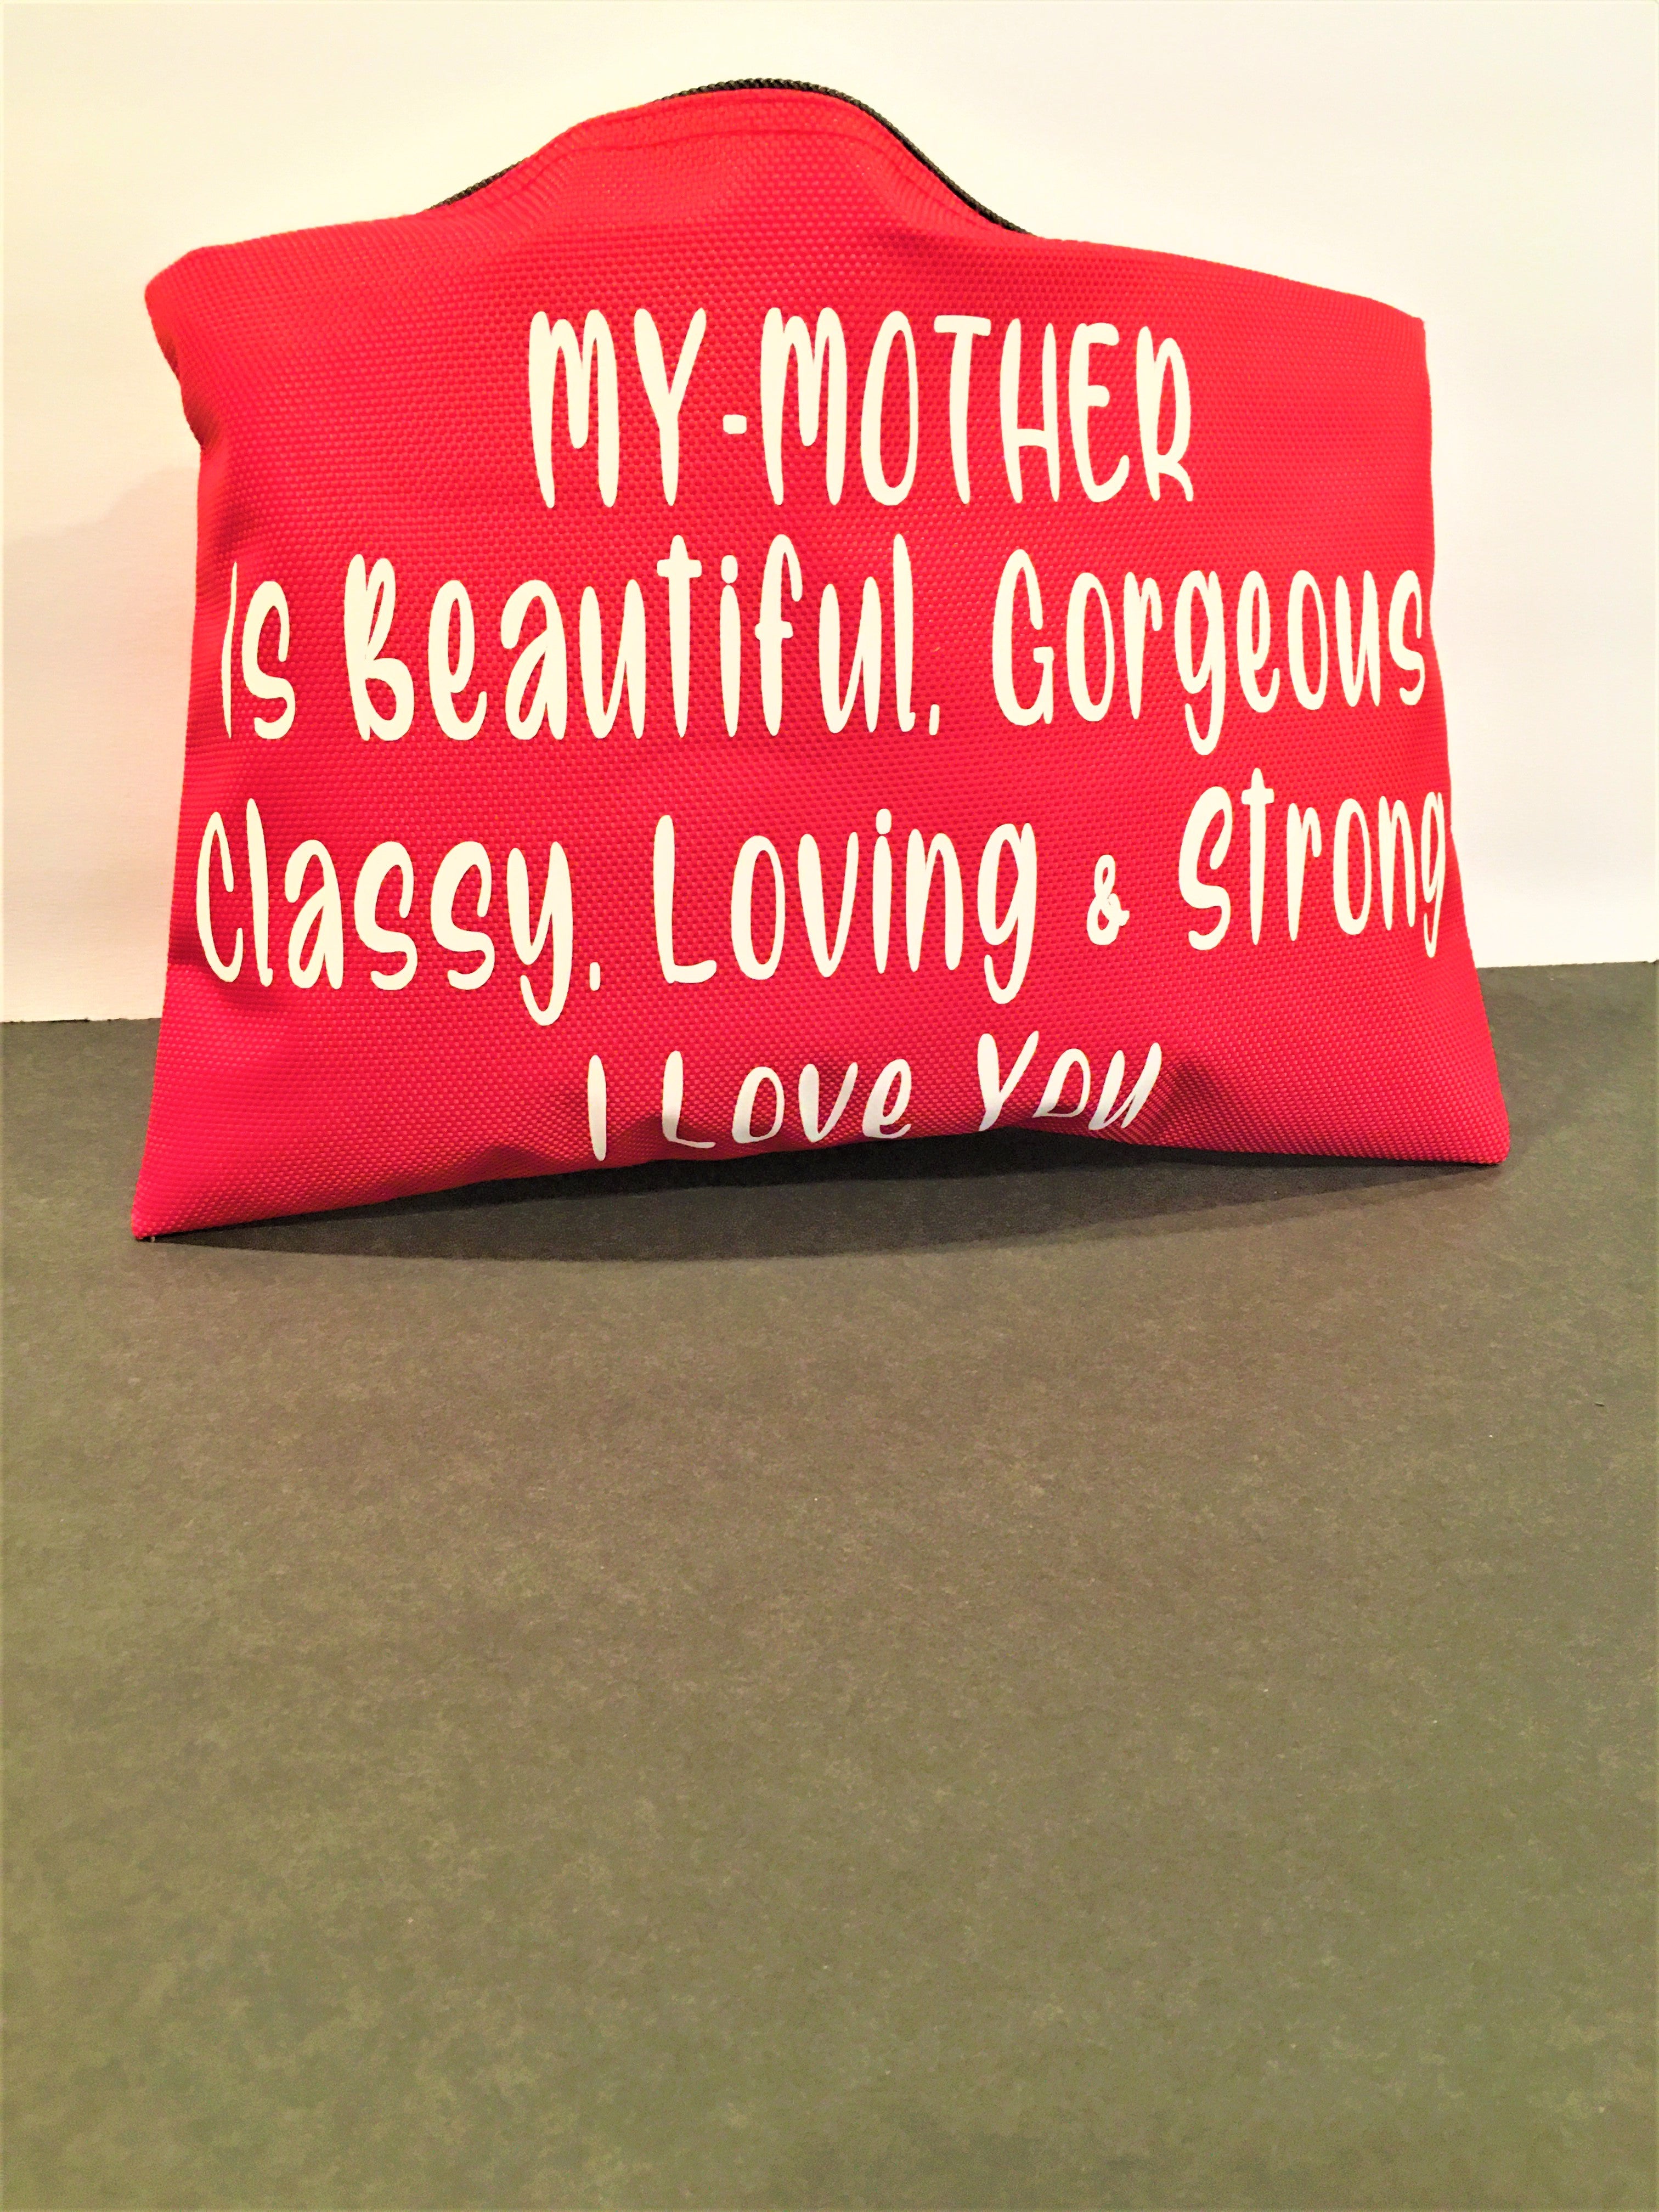 My Mother Is Beautiful Make-up bag 12x 7.5"